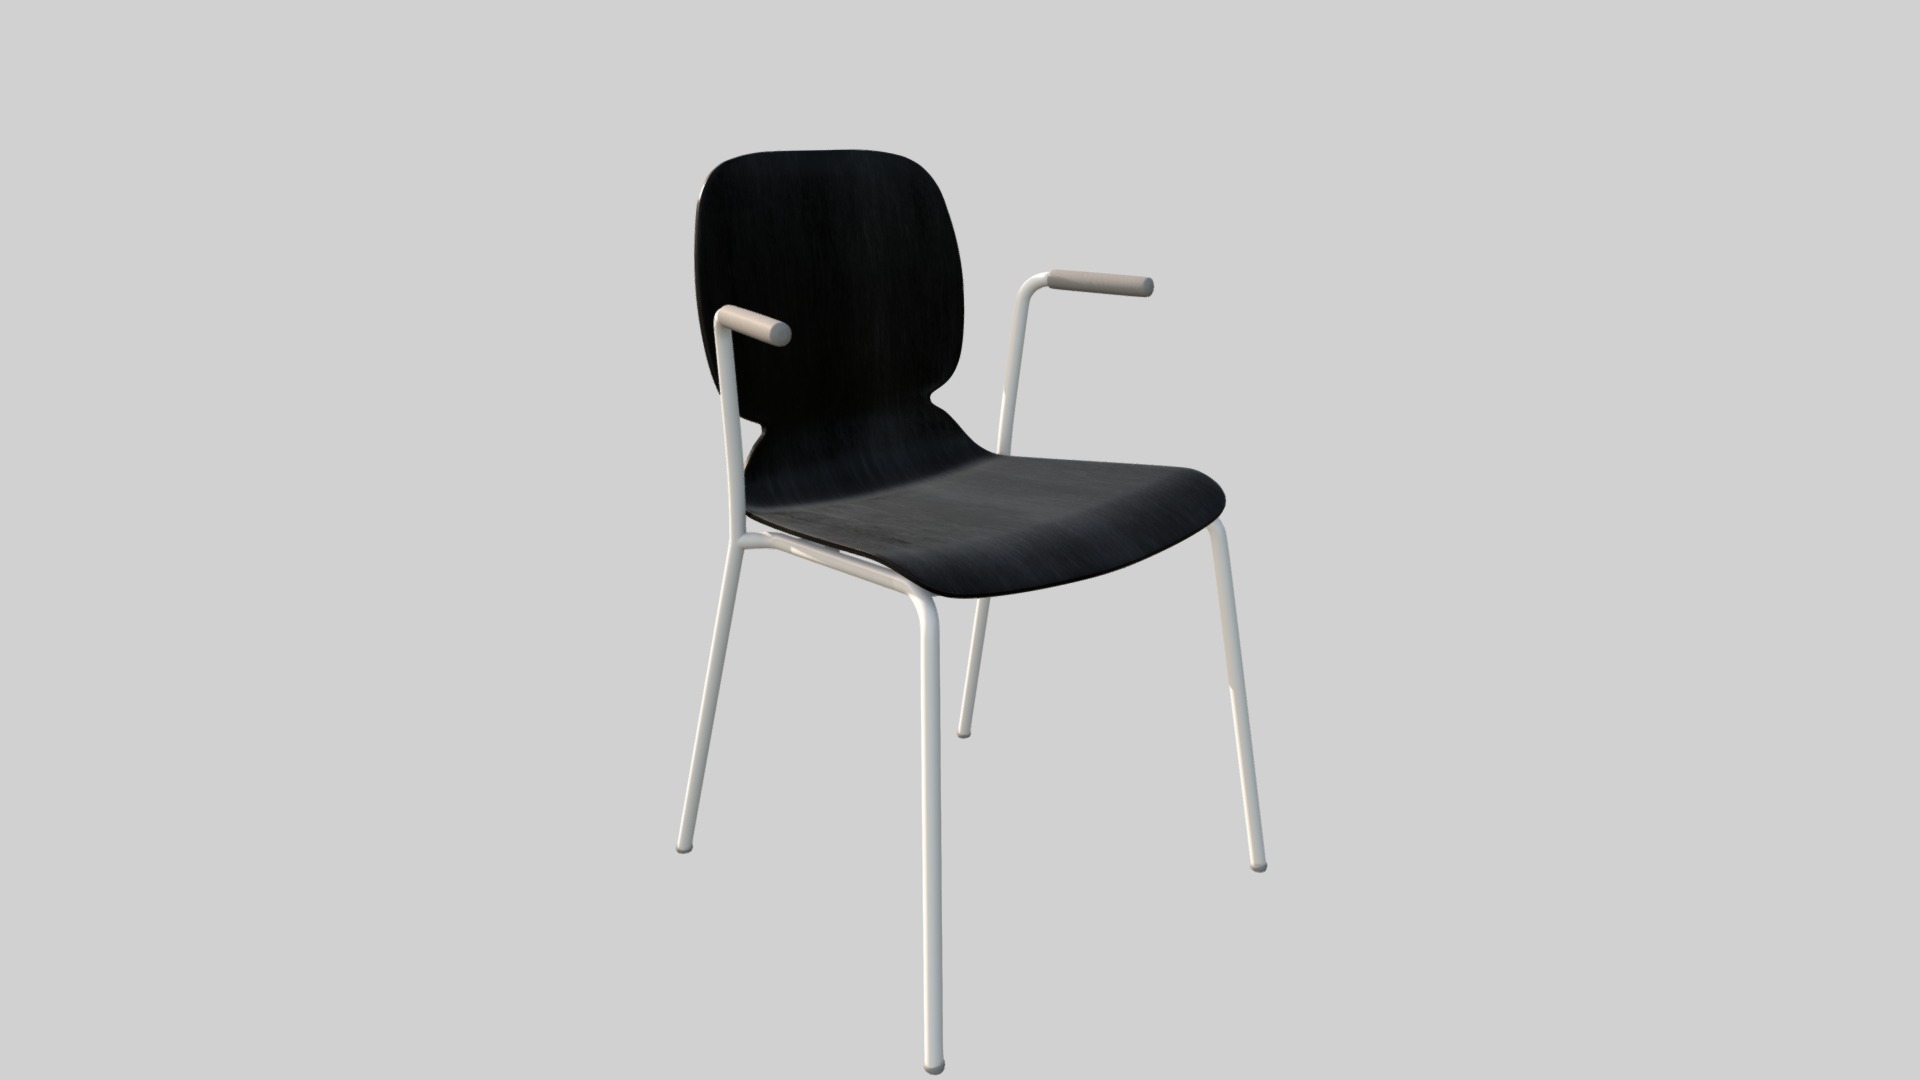 3D model Chair Svenbertil - This is a 3D model of the Chair Svenbertil. The 3D model is about a black chair with a white background.